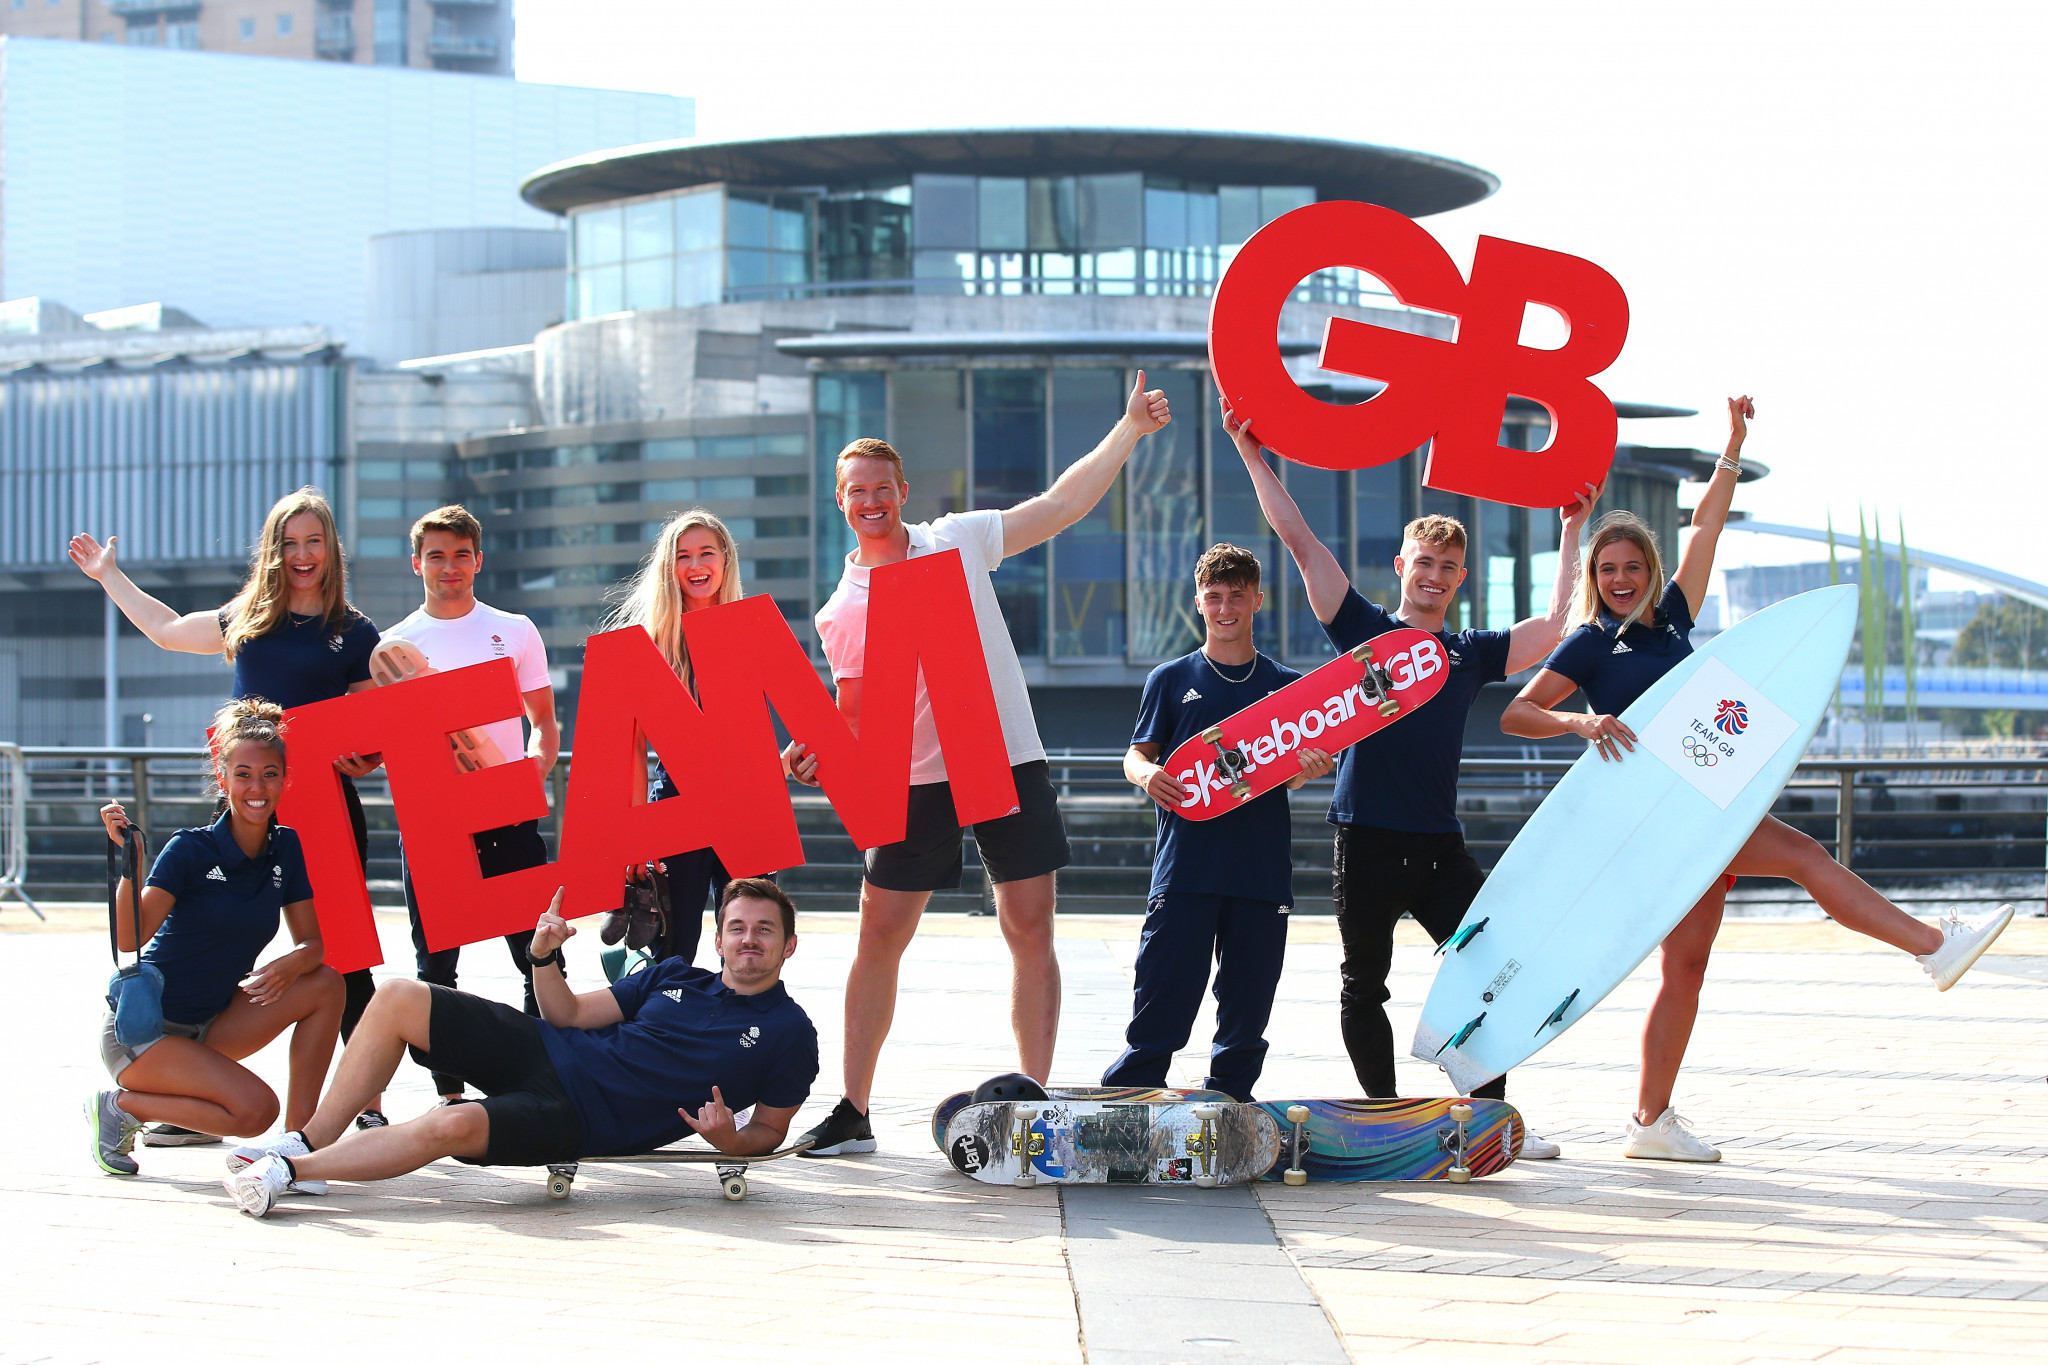 Team GB announced their 44-person performance services team for the upcoming Tokyo 2020 Olympic Games ©Team GB